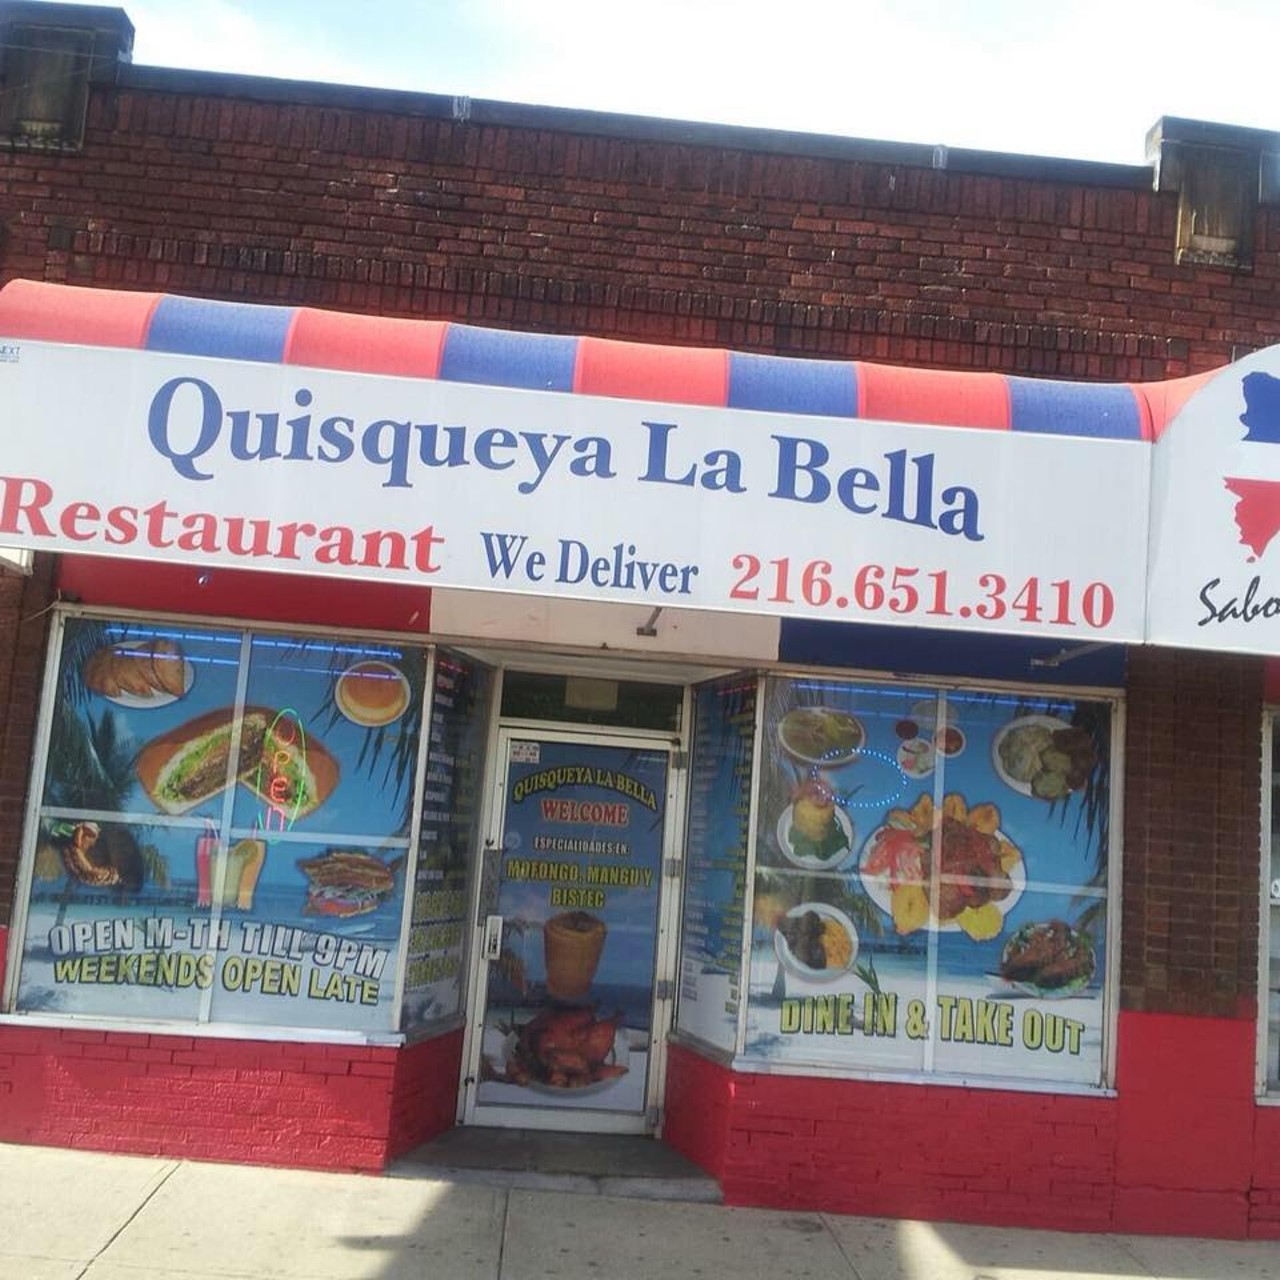  Quisqueya
2317 Denison Ave, Cleveland
Taking over for the popular Moncho&#146;s in Brooklyn, Quisqueya expanded from their Clark-Fulton spot. The restaurant specializes in Puerto Rican and Dominican dishes like sancocho, mondongo, empanadillas, alcapurrias, fried pork with plantains, camarones con mofongo, and beef stew with rice and beans. 
Photo via Quisqueya Latin Cuisine/Facebook